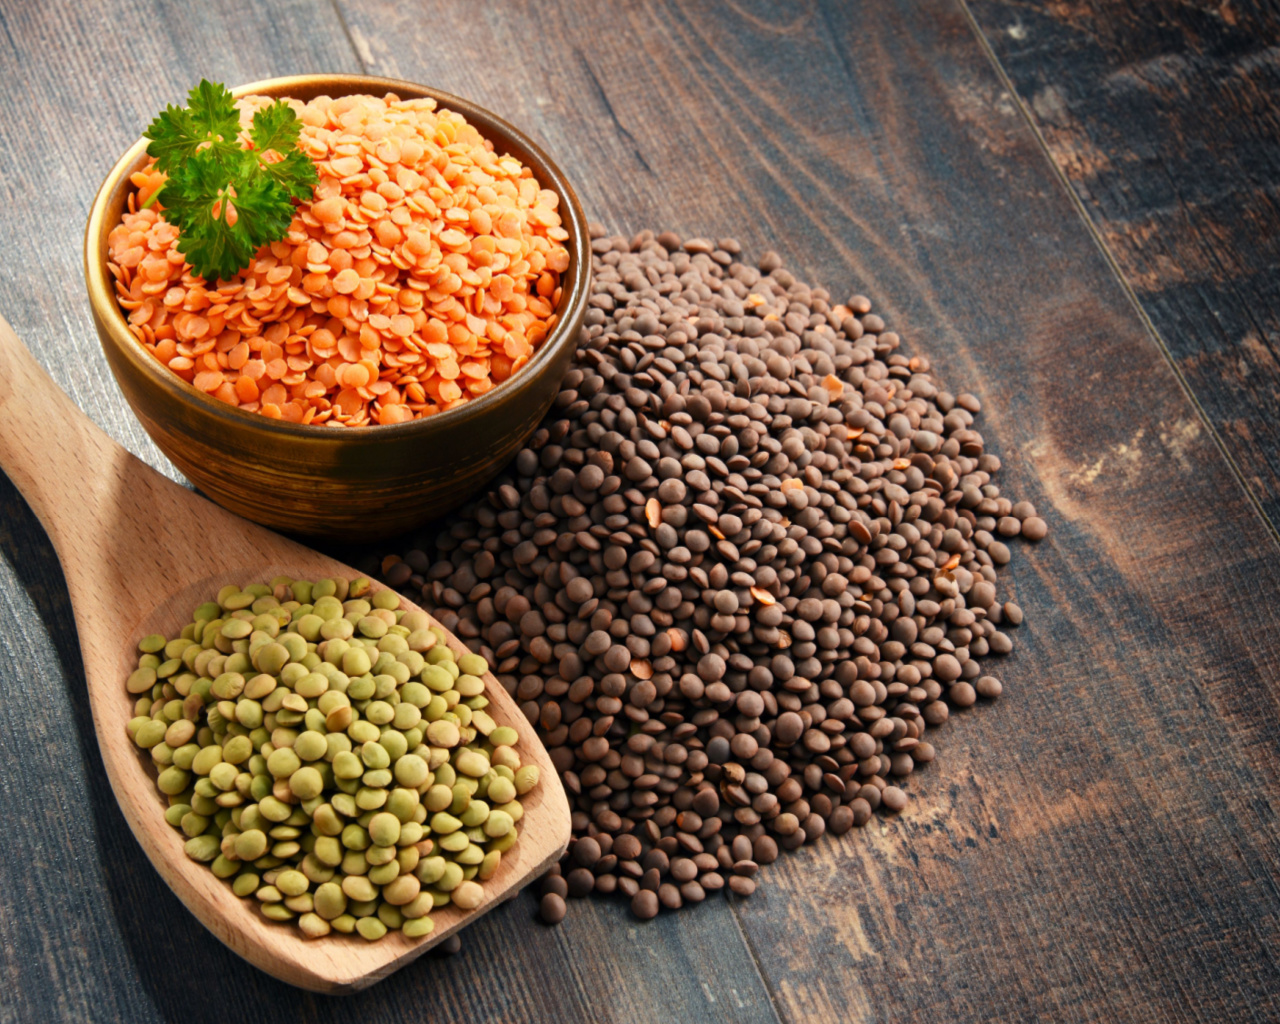 Thinking About Going Plant-Based? Here’s a List of Vegan Protein Sources to Add to Your Diet